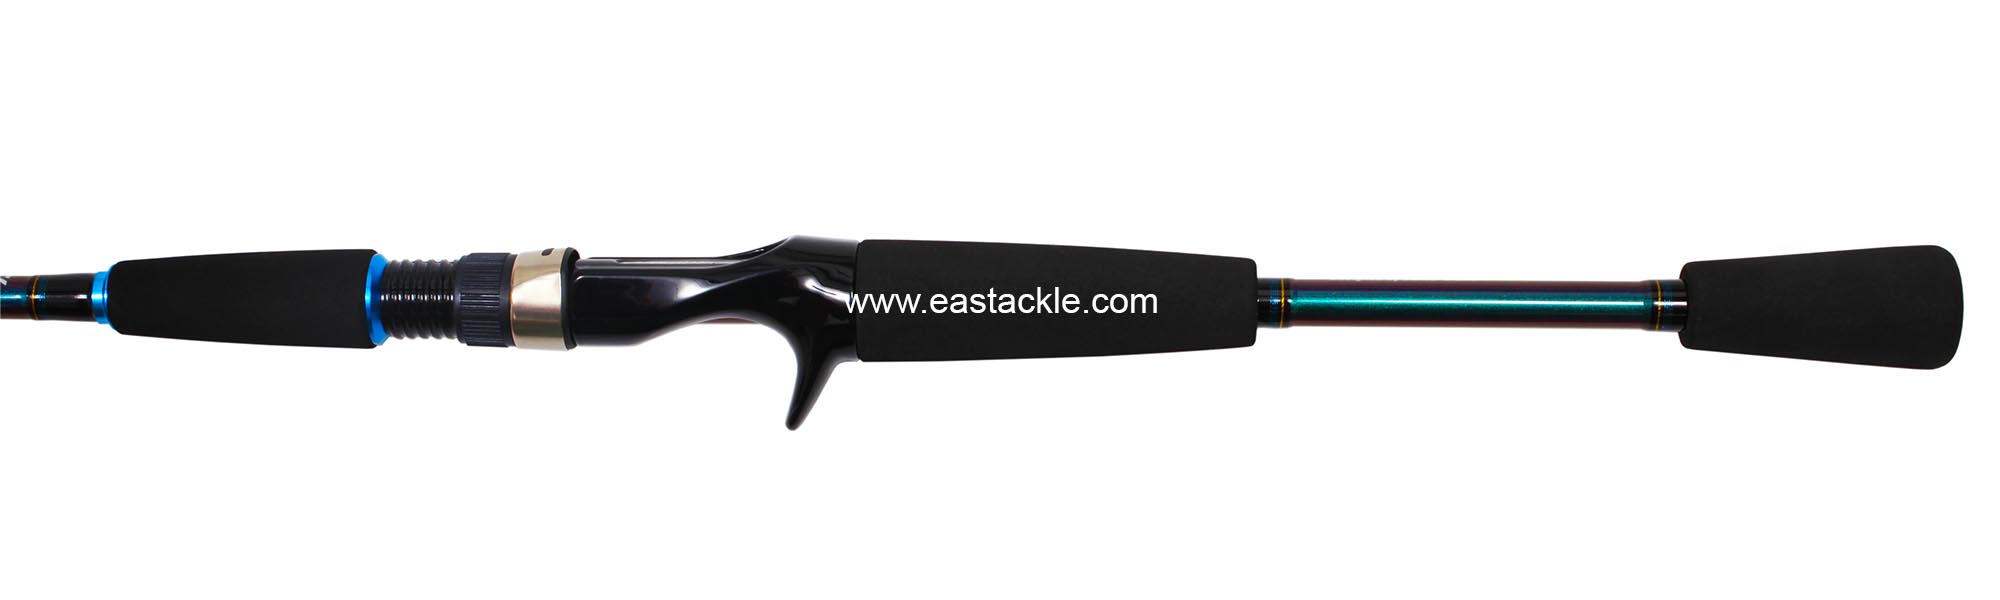 Daiwa - Harrier  - 602MHB-SD - Bait Casting Rod - Handle Section (Side View) | Eastackle